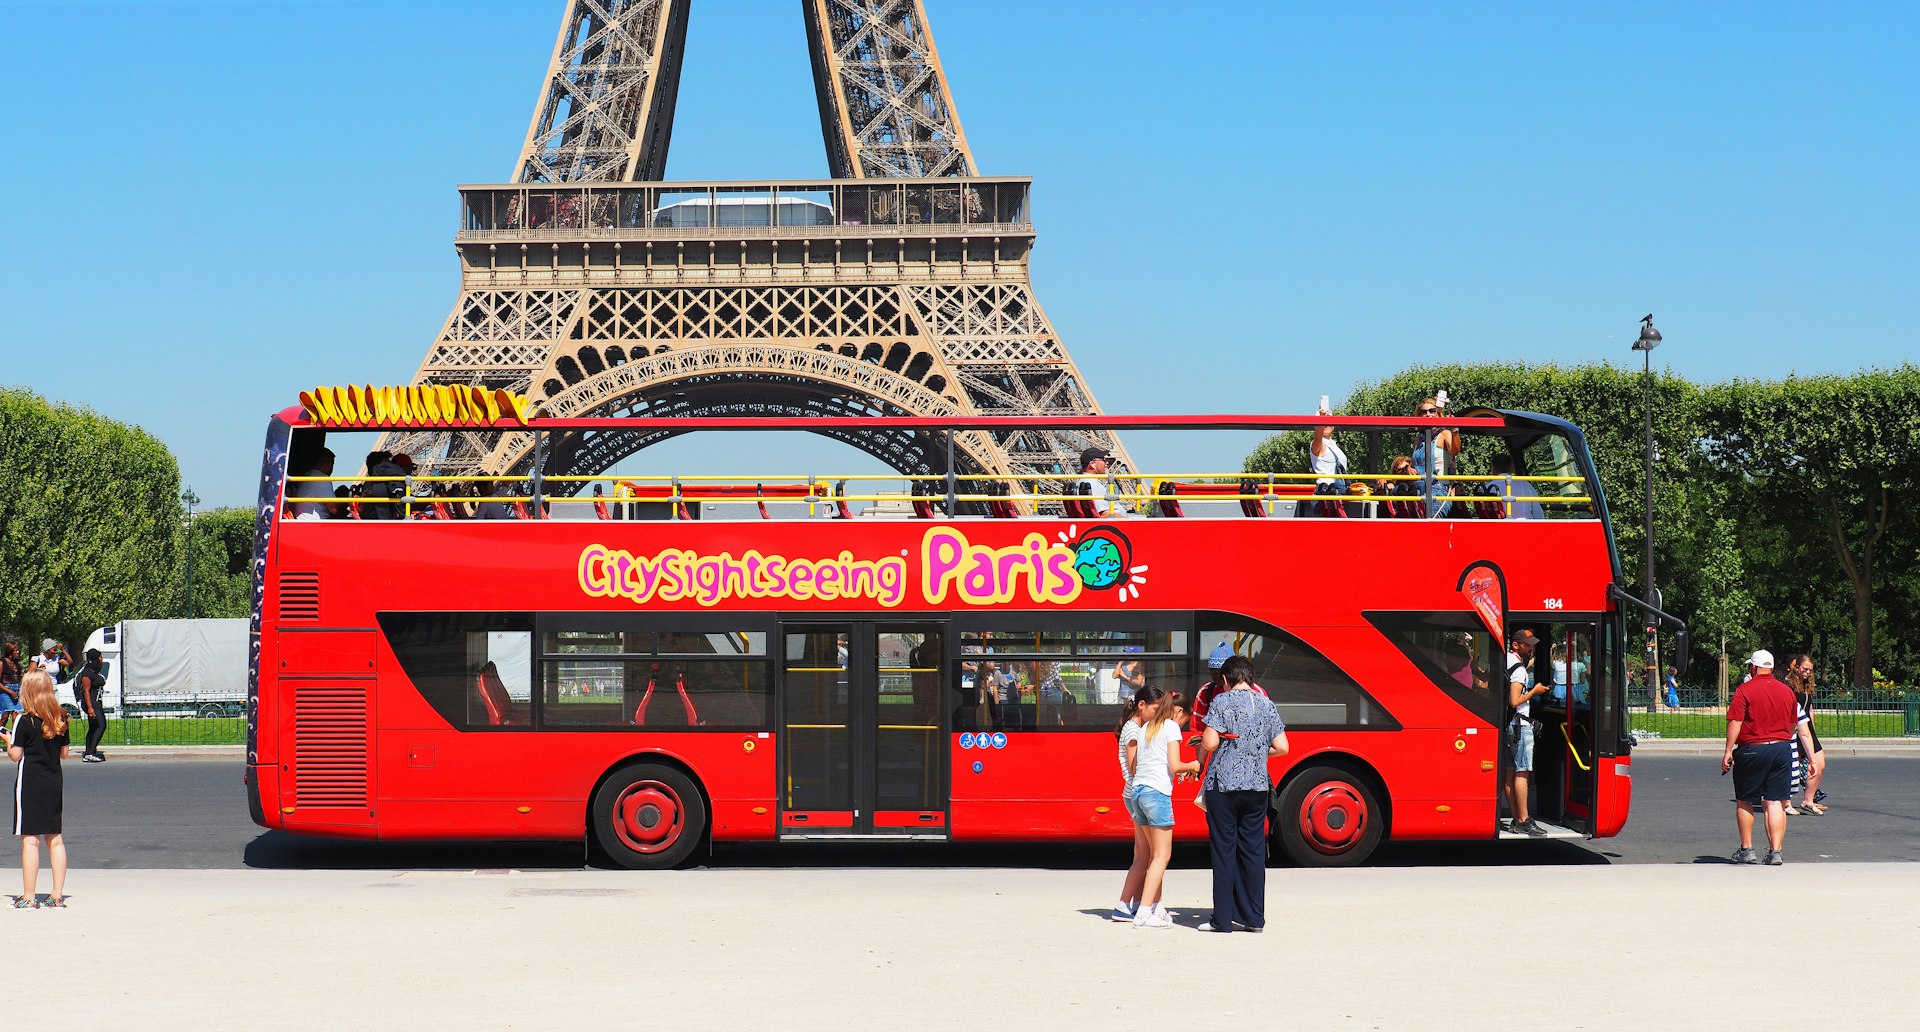 The hop on, hop off buses are certain to route to a destination's top attractions